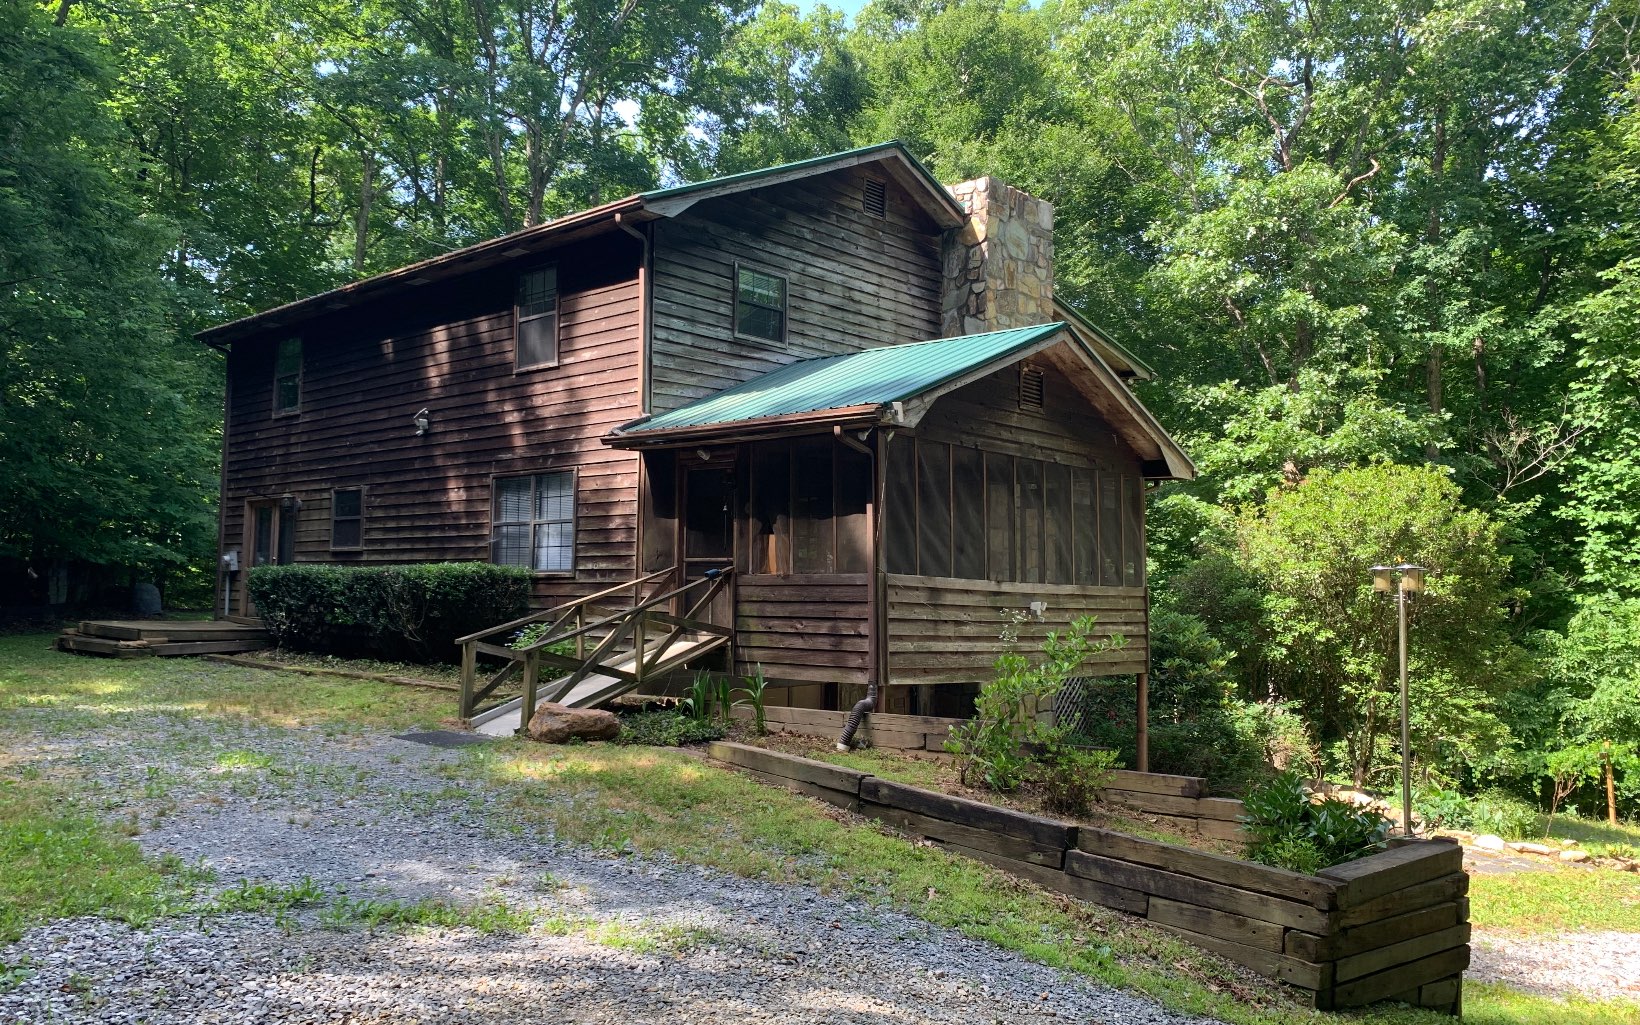 This home borders 2000+ acres of USFS, hunt in your backyard! 13 miles from Downtown Blue Ridge makes it the perfect location for a weekend getaway, rental, or full-time residence. Large bedrooms, plenty of storage with an unfinished basement for expansion. Motivated sellers, come have a look and make us an offer.